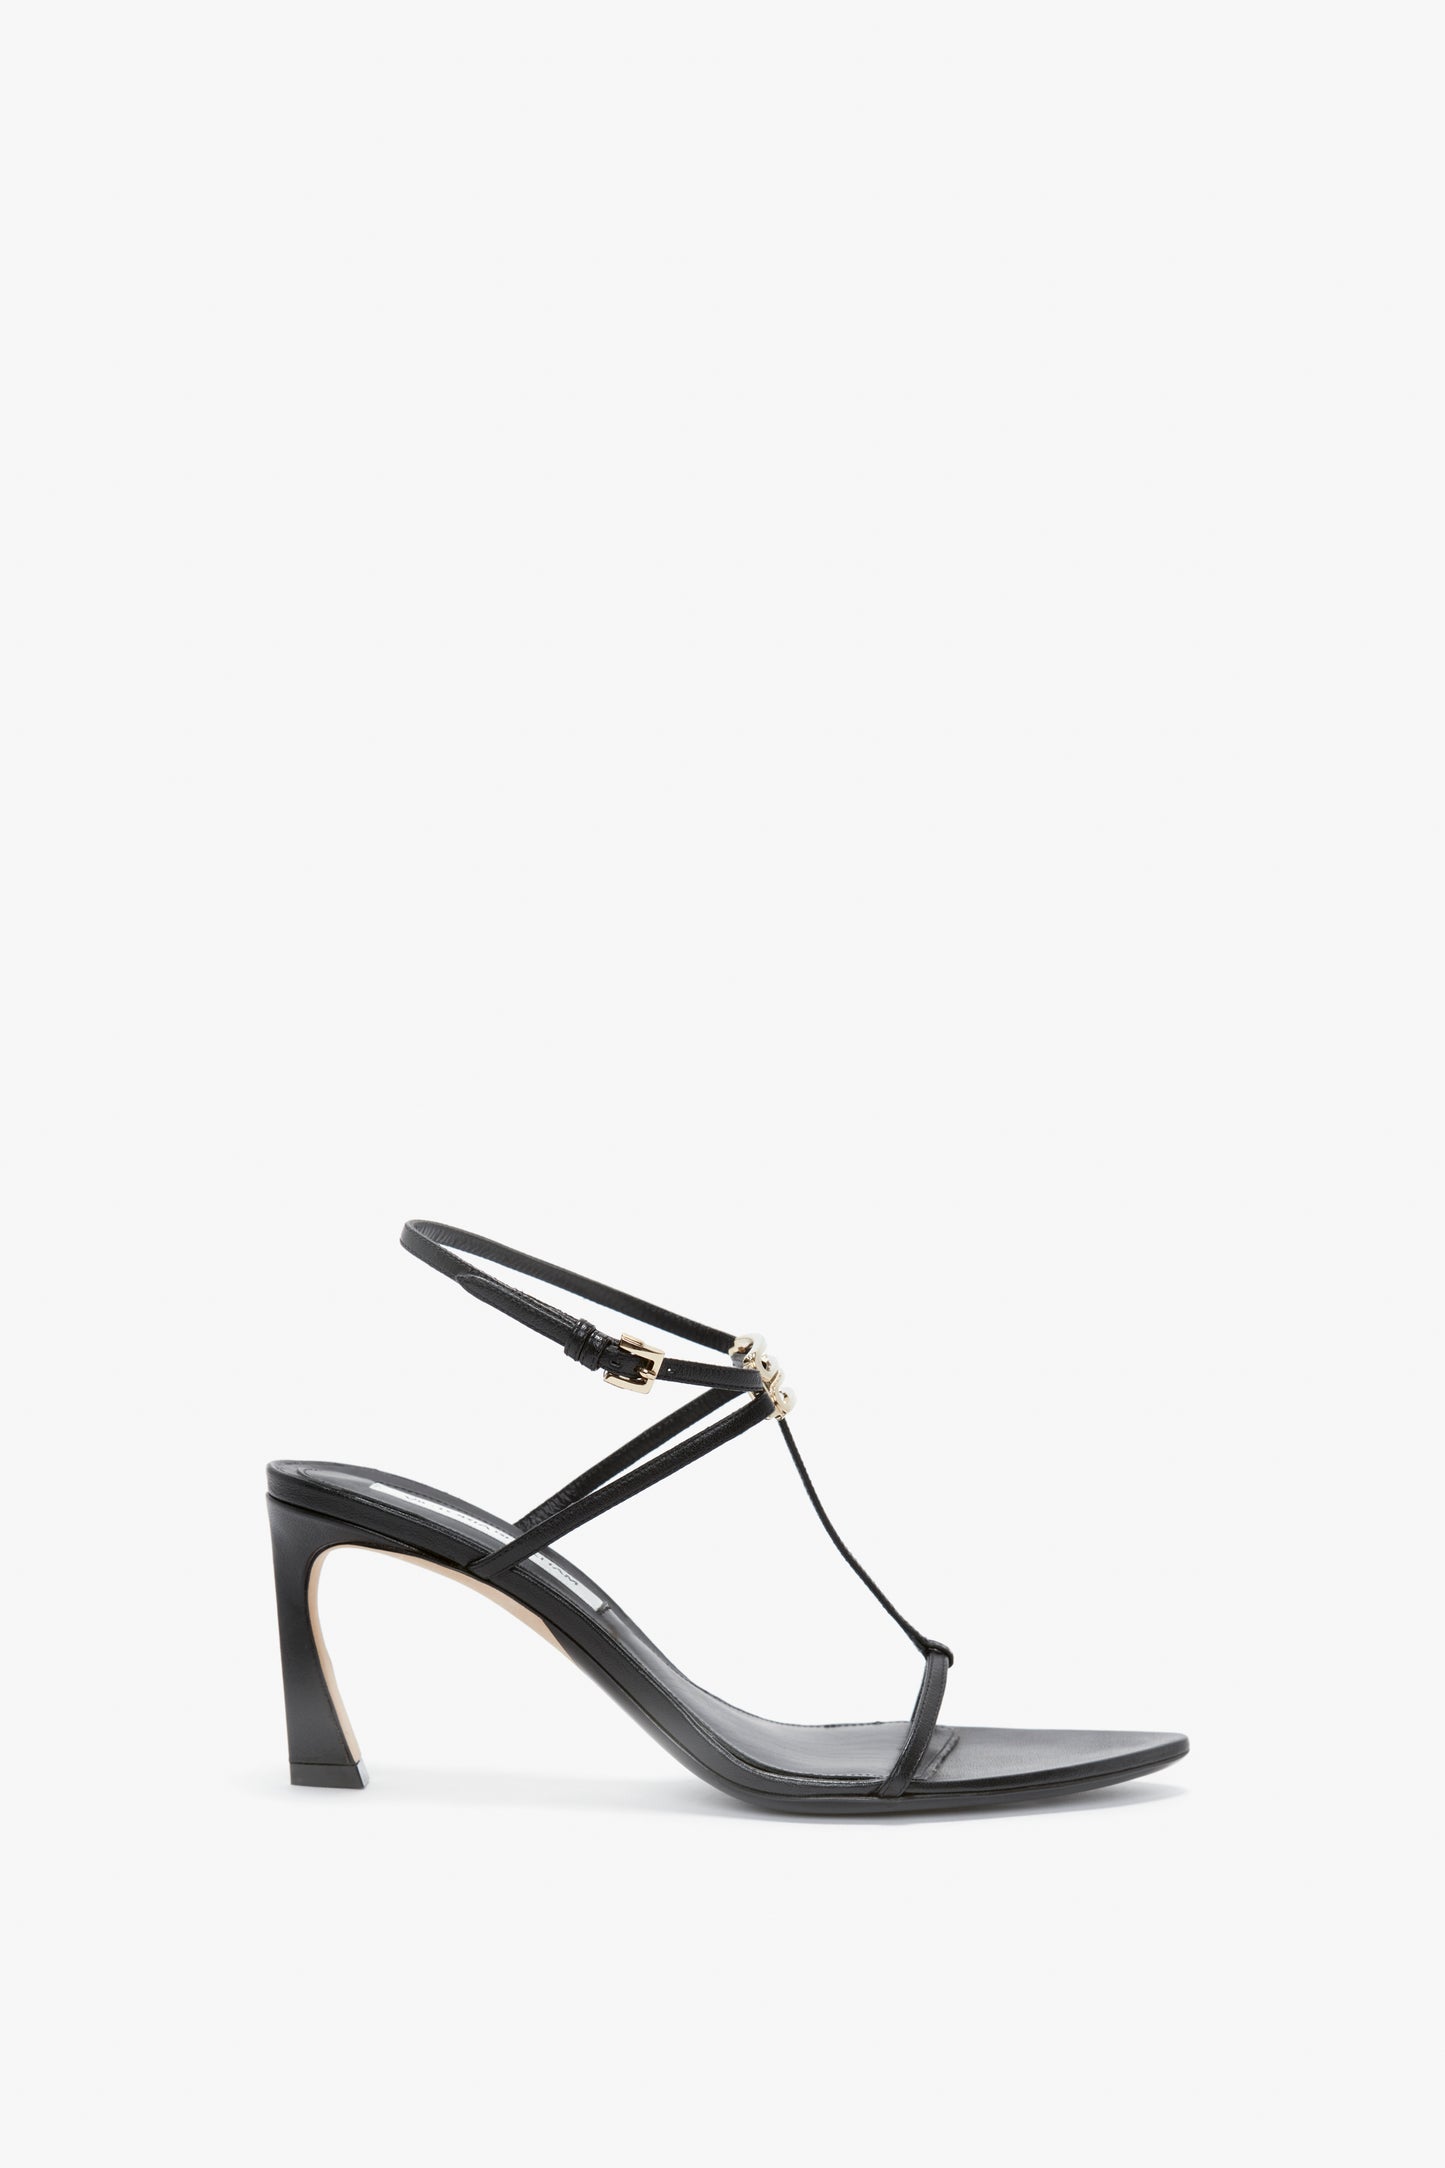 A Frame Detail Sandal In Black Leather by Victoria Beckham, featuring thin nappa leather straps, a minimalist design, and a small decorative bead on the front strap, with an adjustable ankle strap and set against a white background.